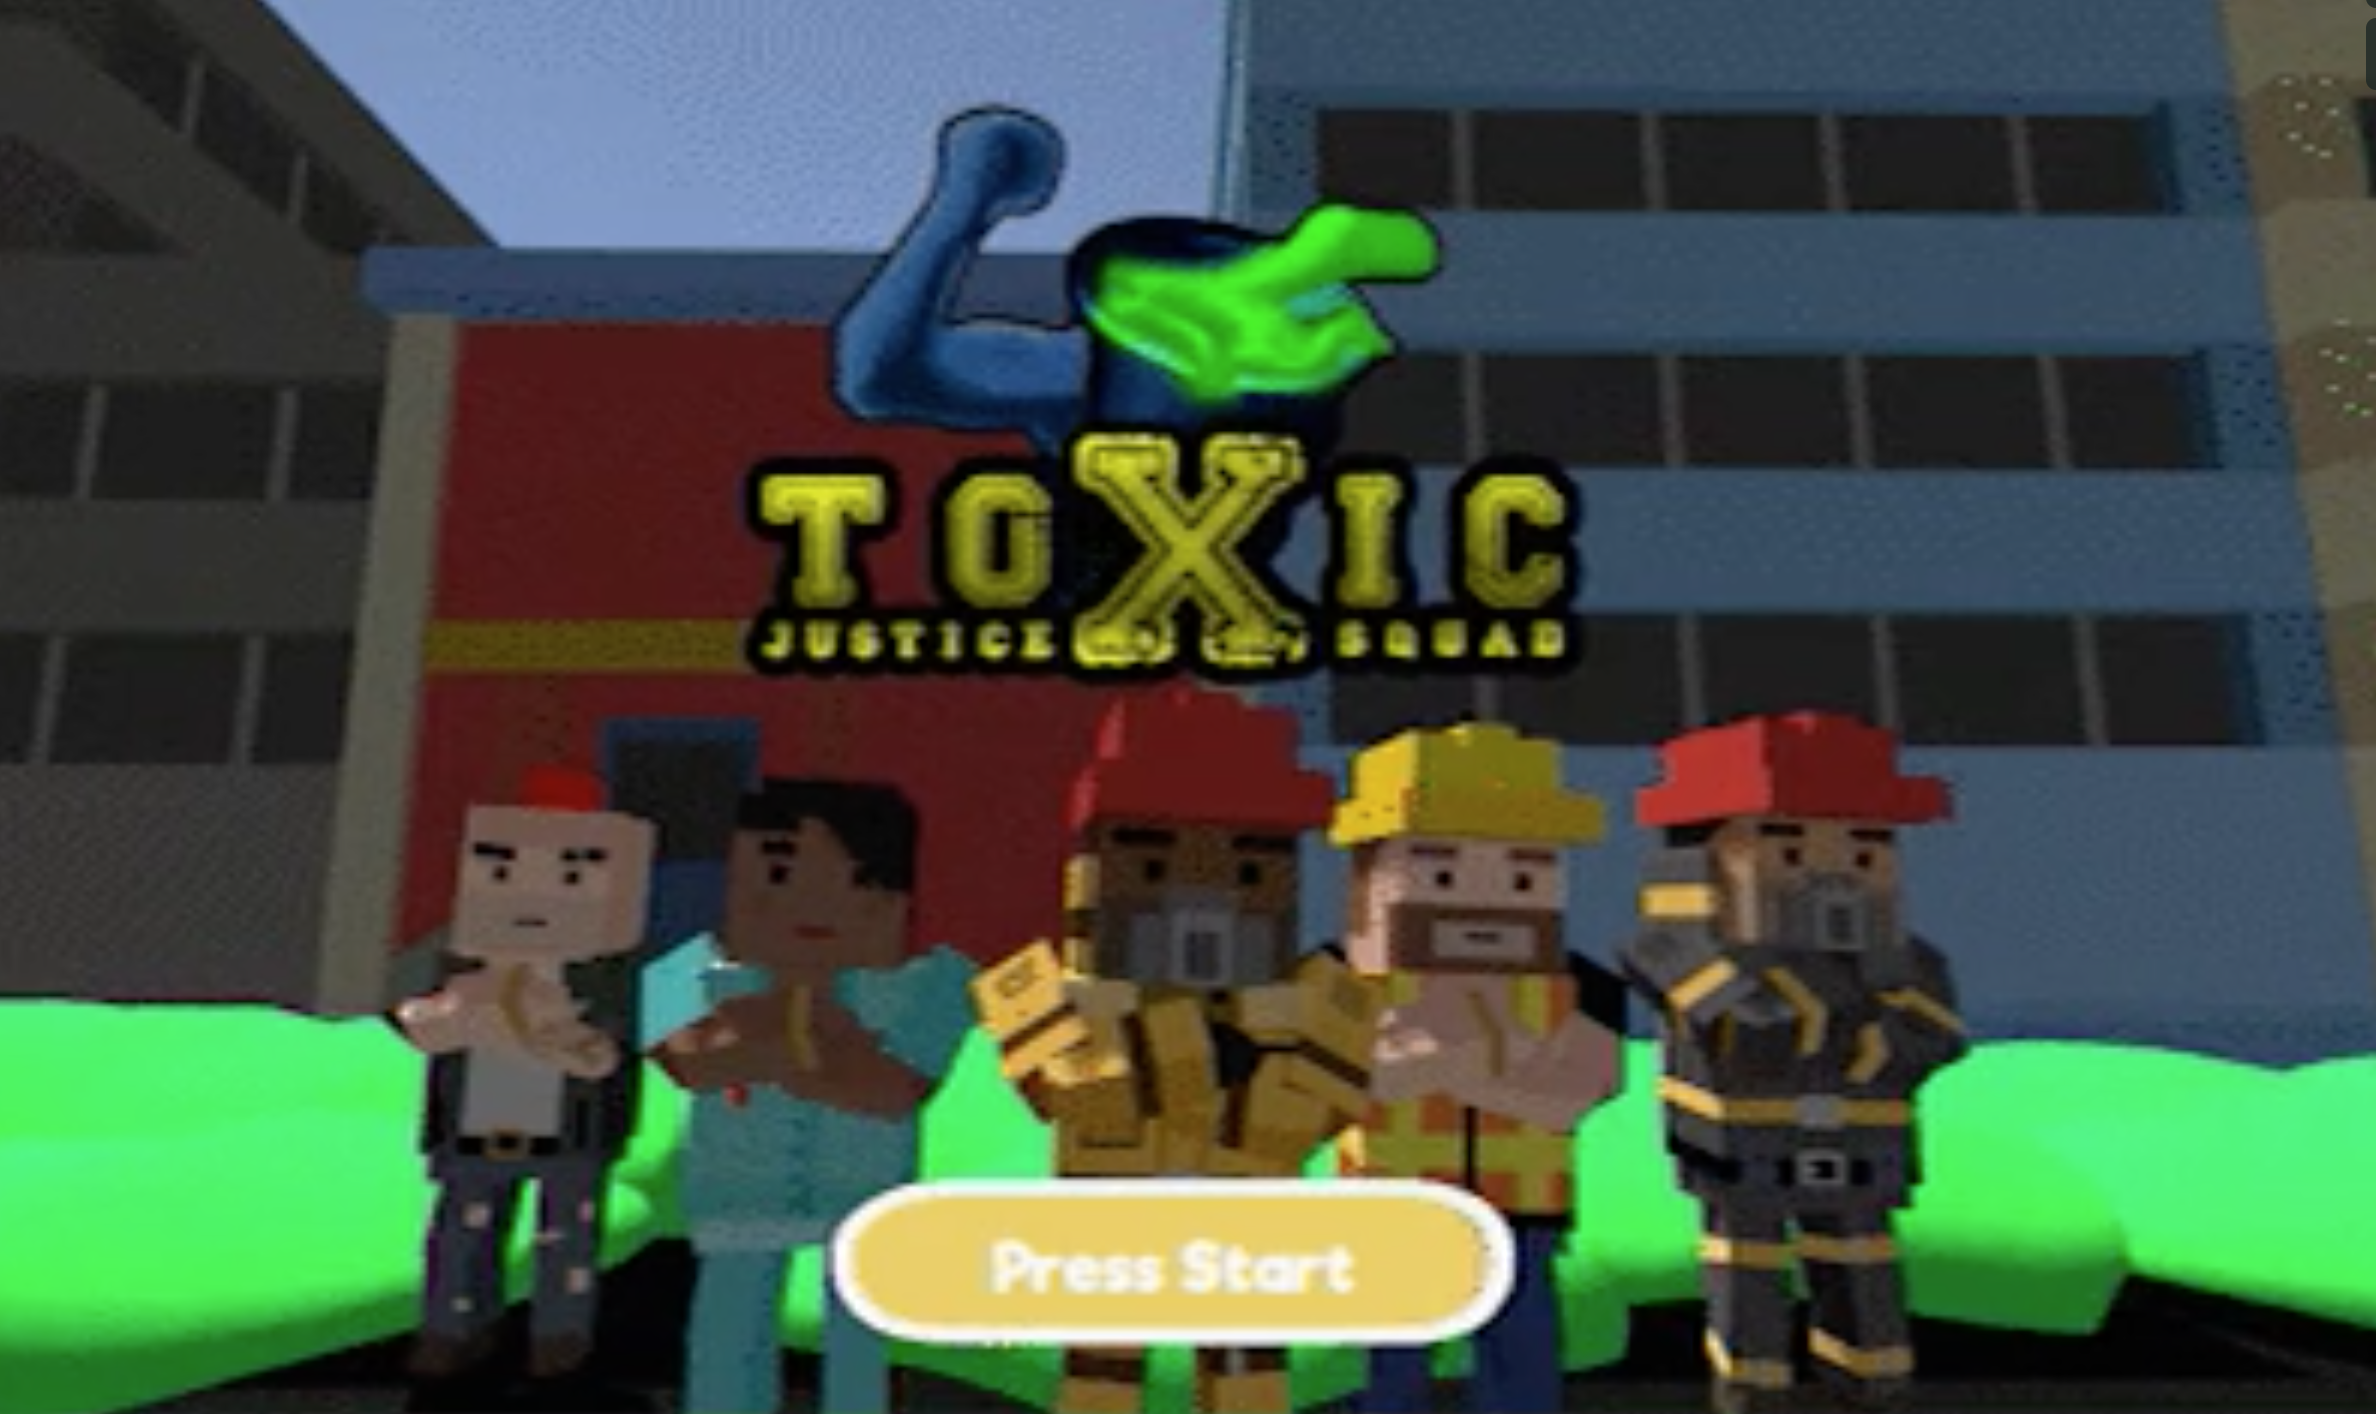 Toxic justice squad home screen